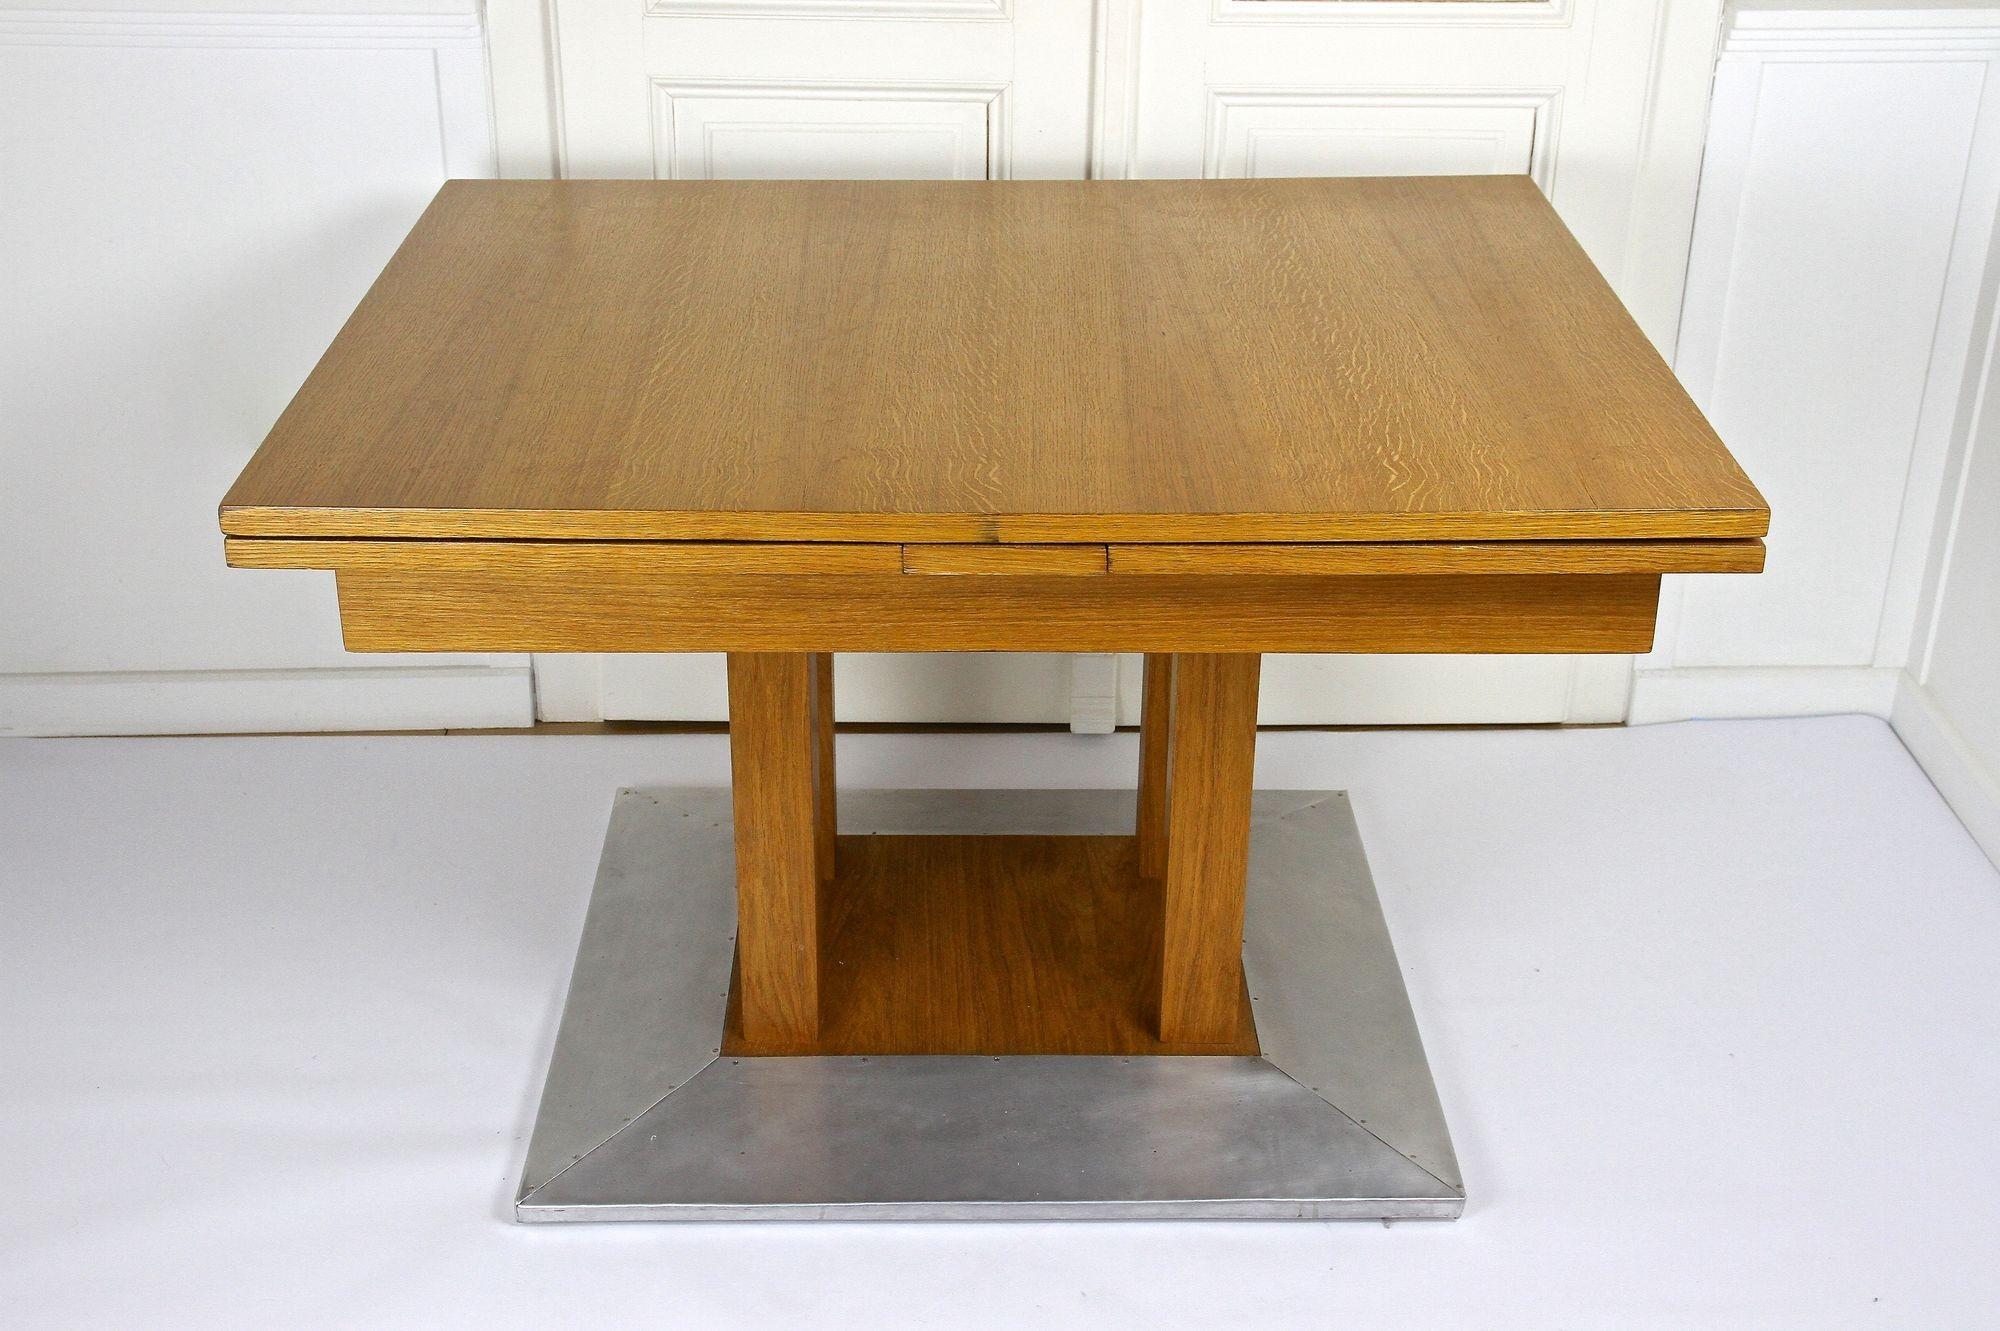 20th Century Extendable Oakwood Dining Table by Josef Hoffmann, AT ca. 1905 For Sale 4